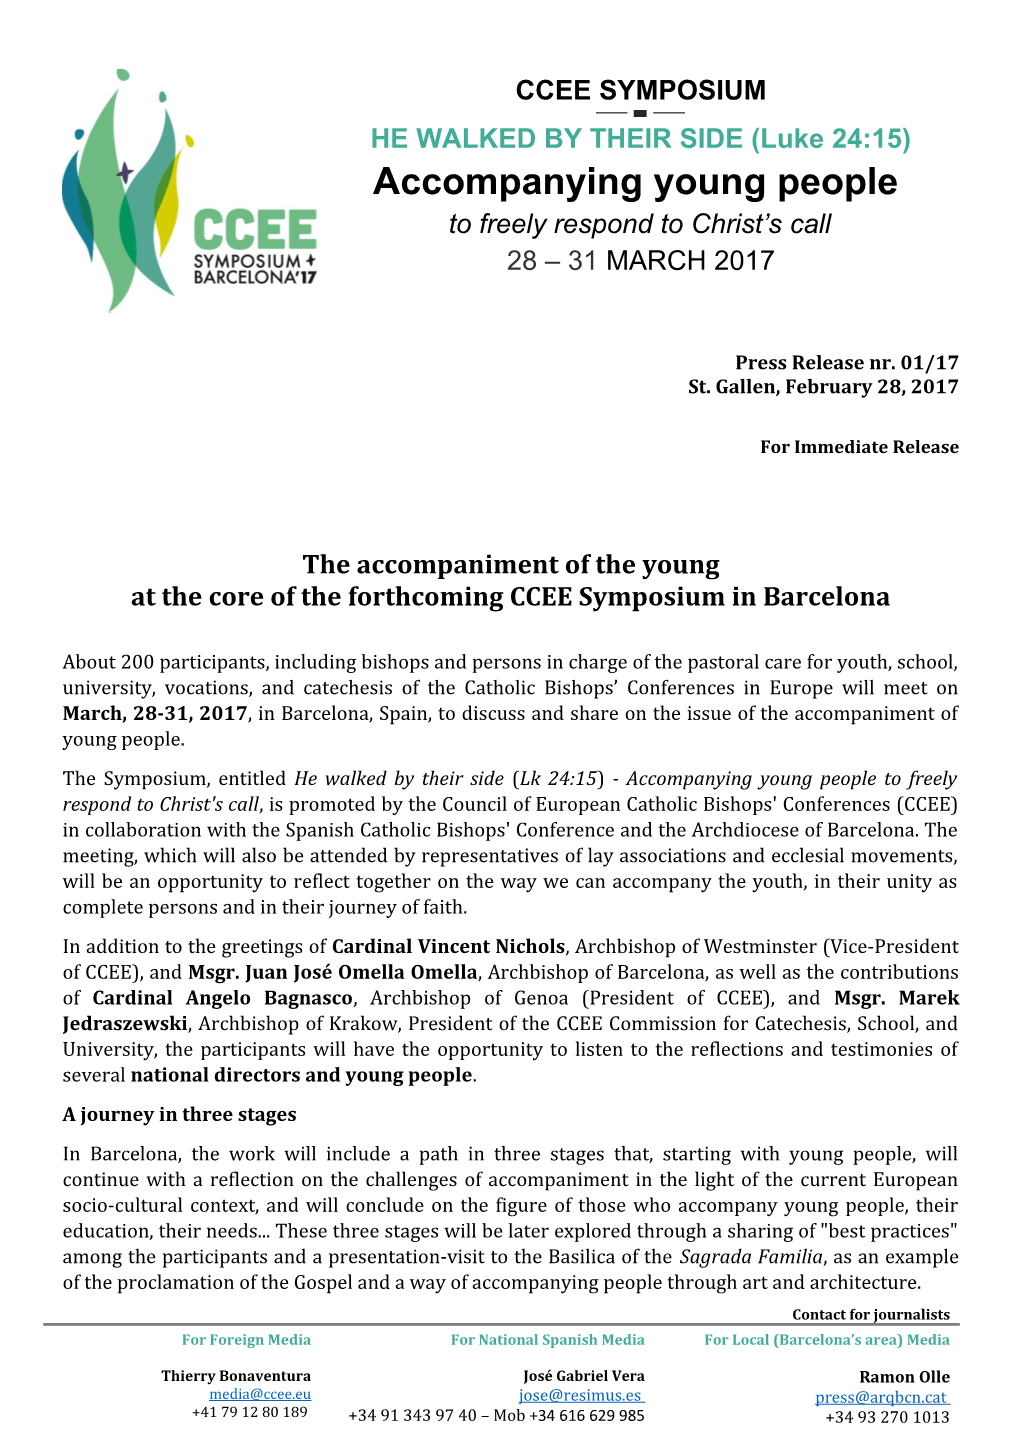 At the Core of the Forthcoming CCEE Symposium in Barcelona